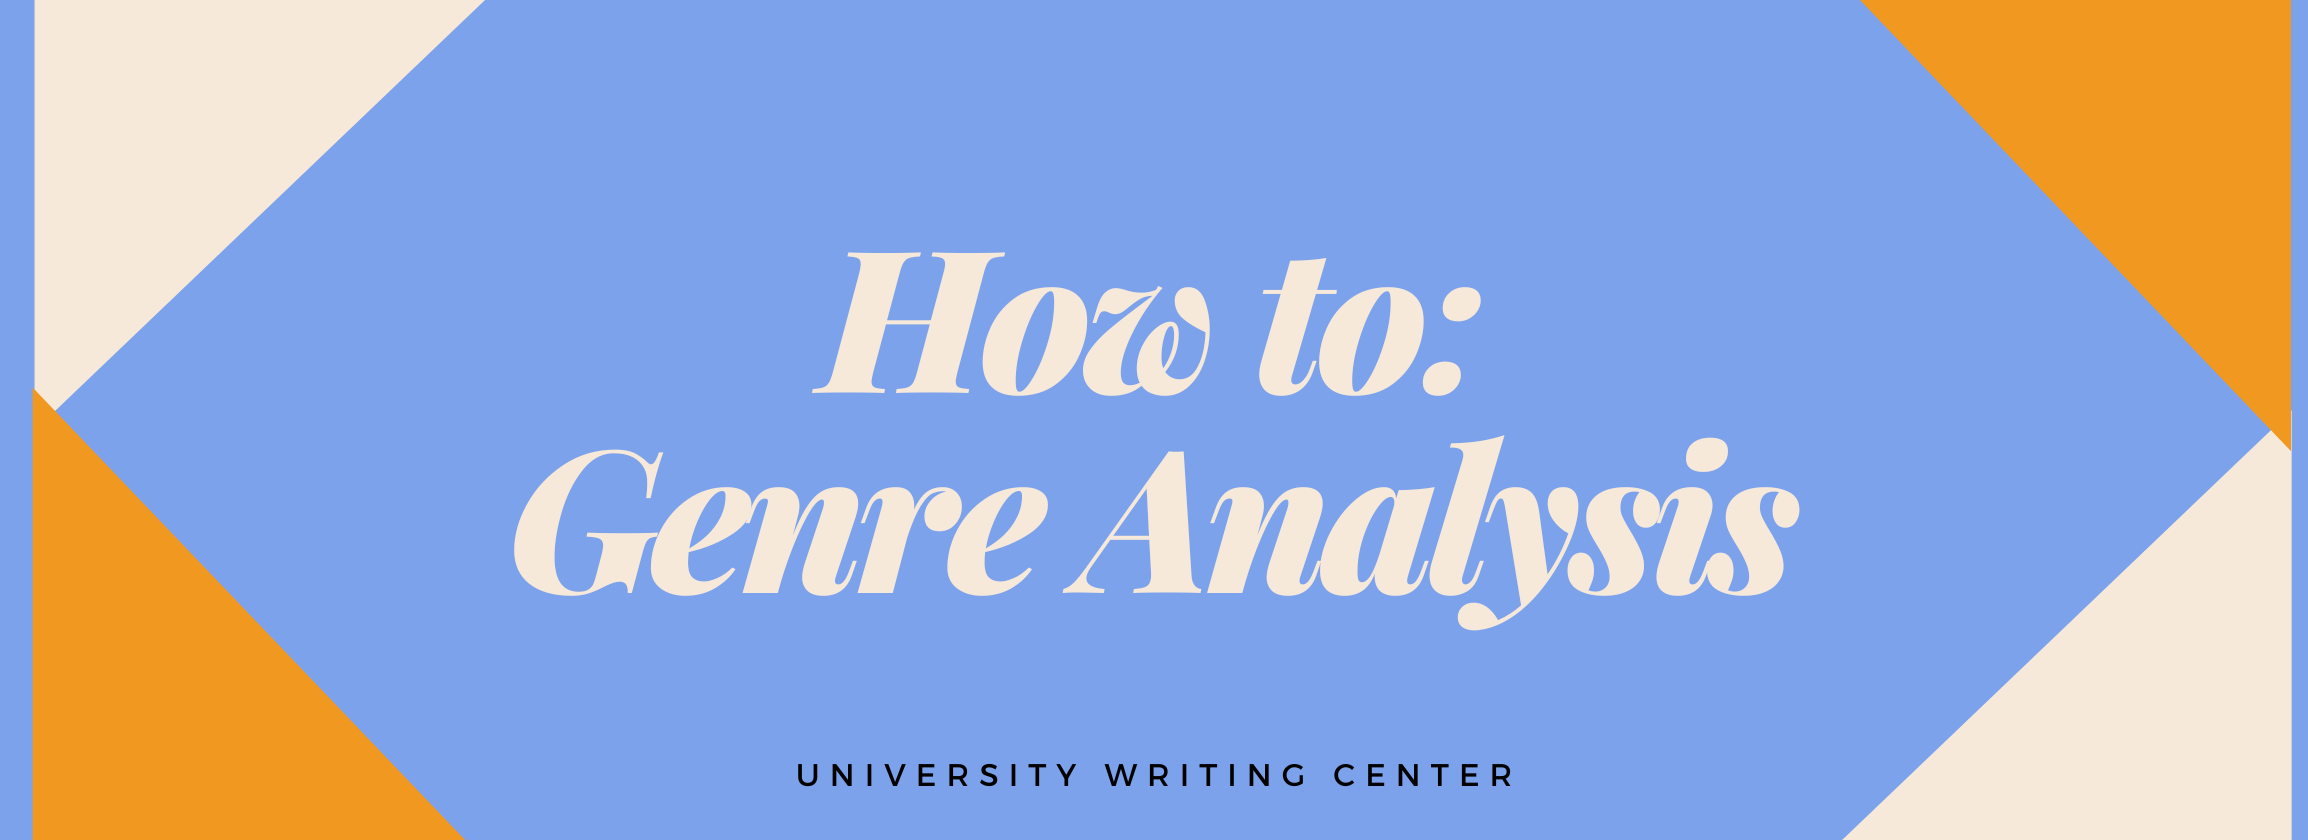 How To: Genre Analysis